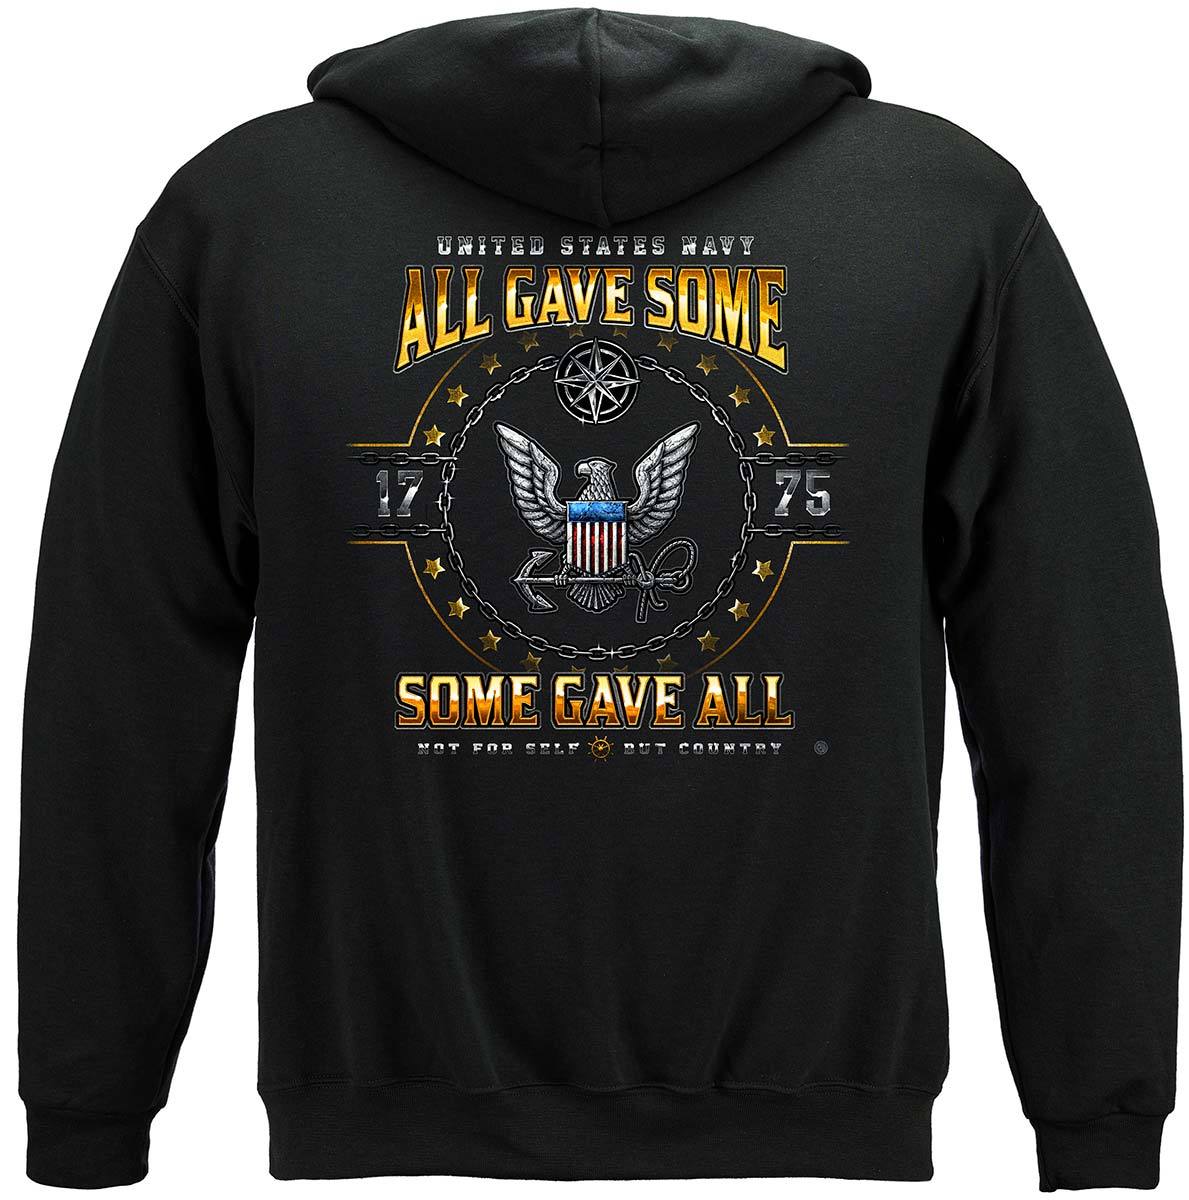 US Navy All Gave Some Premium T-Shirt